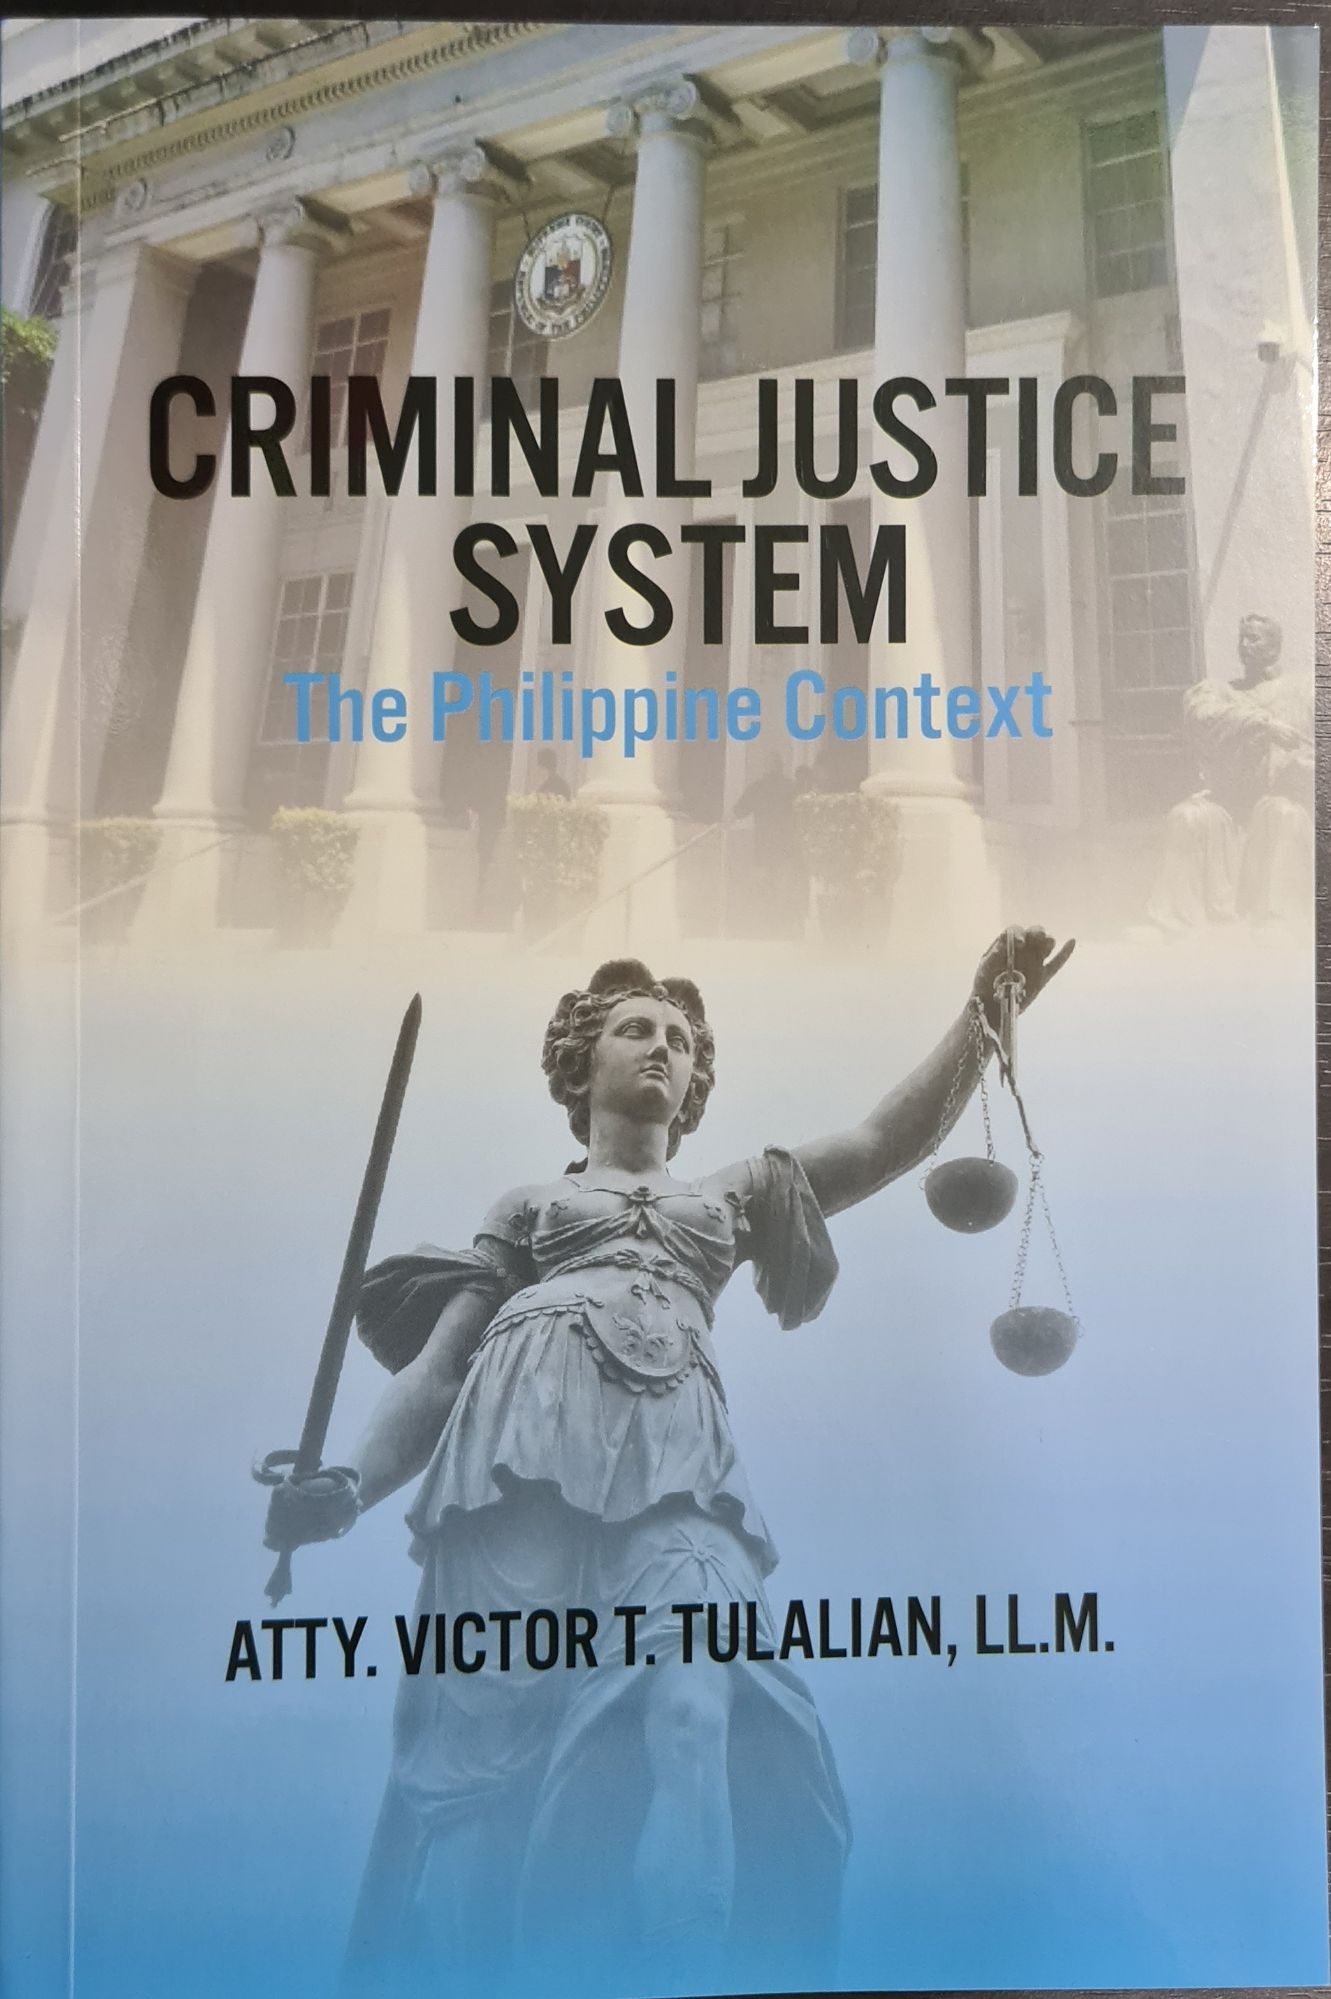 essay about the justice system in the philippines